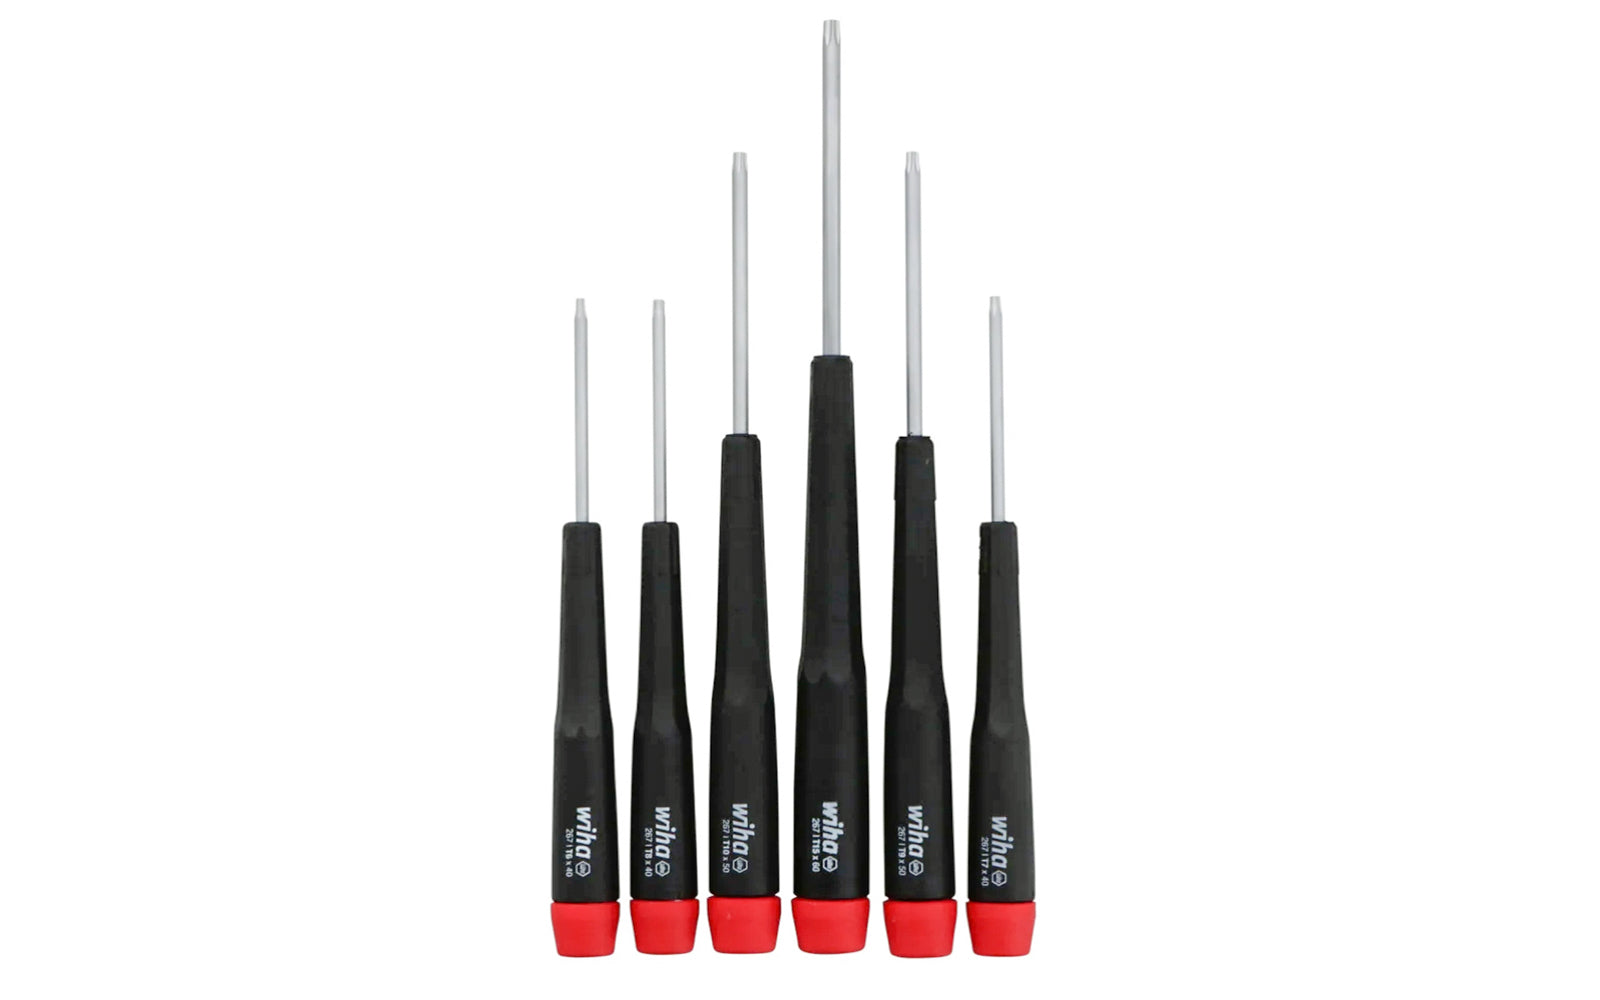 A high quality Wiha Torx precision screwdriver 6-piece set made out of hardened CRM72 tool steel. Excellent for working on small components & modern electronics. Set includes: T6, T7, T8, T9, T10, T15 sizes. Made in Germany. Wiha Model 26790.